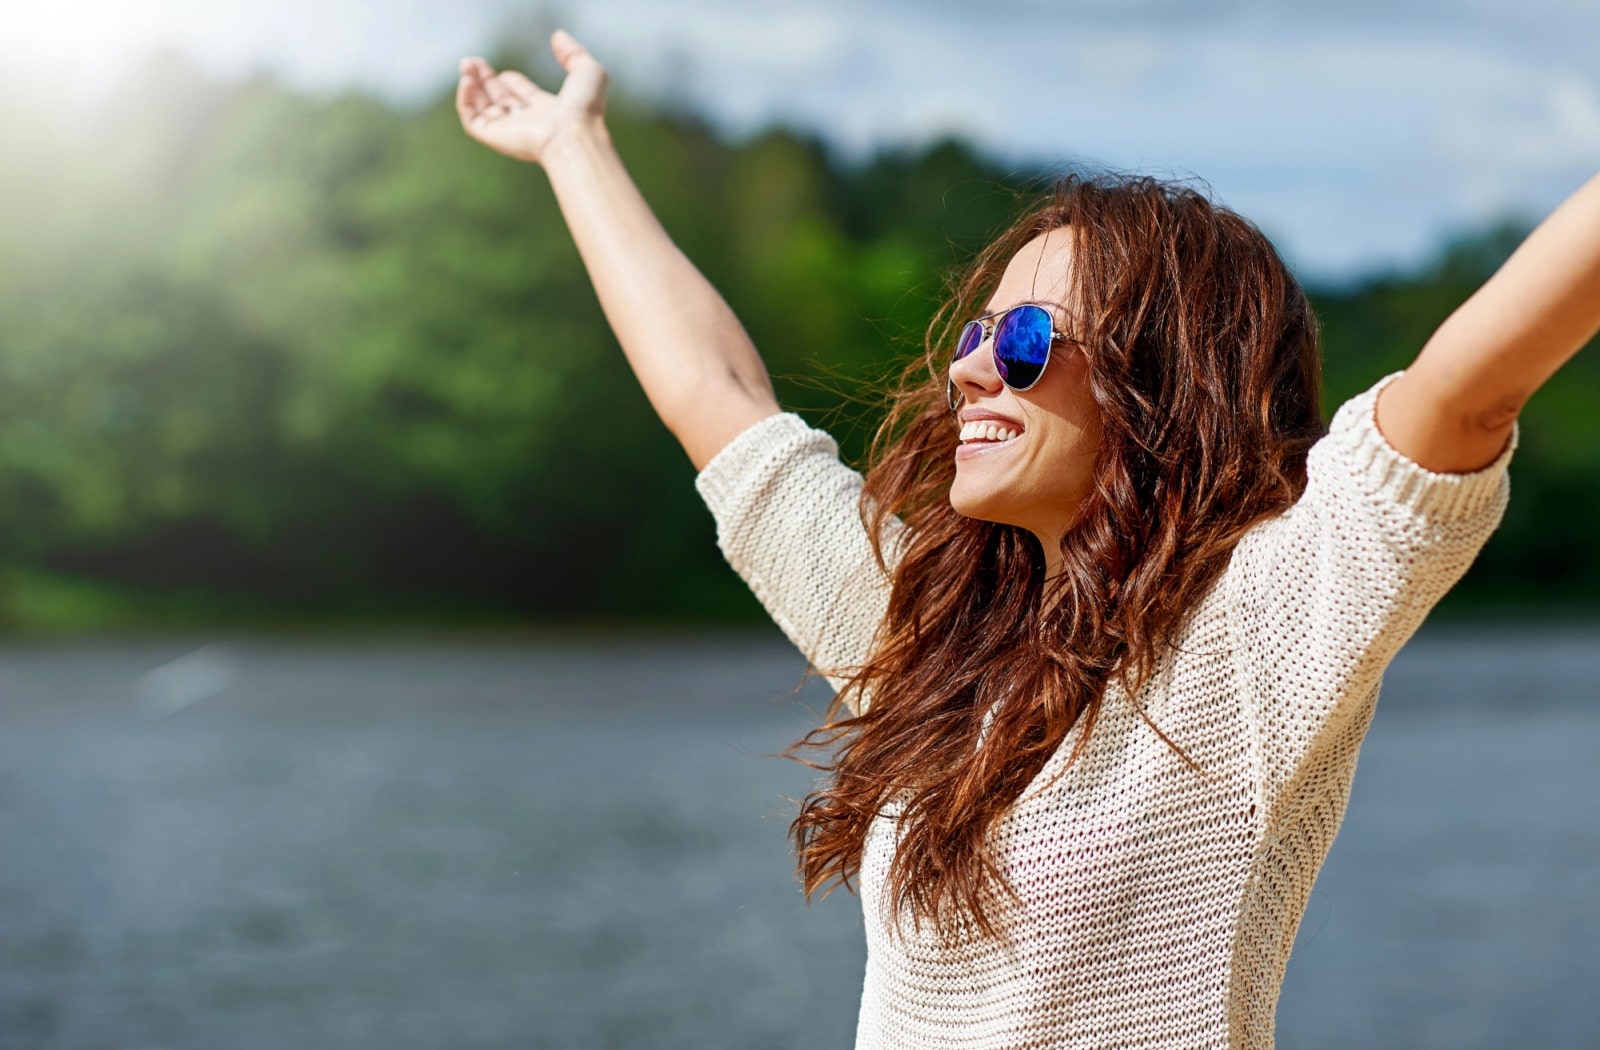 A woman wearing polarized sunglasses, smiling and holding her arms up in the air while she is outside.